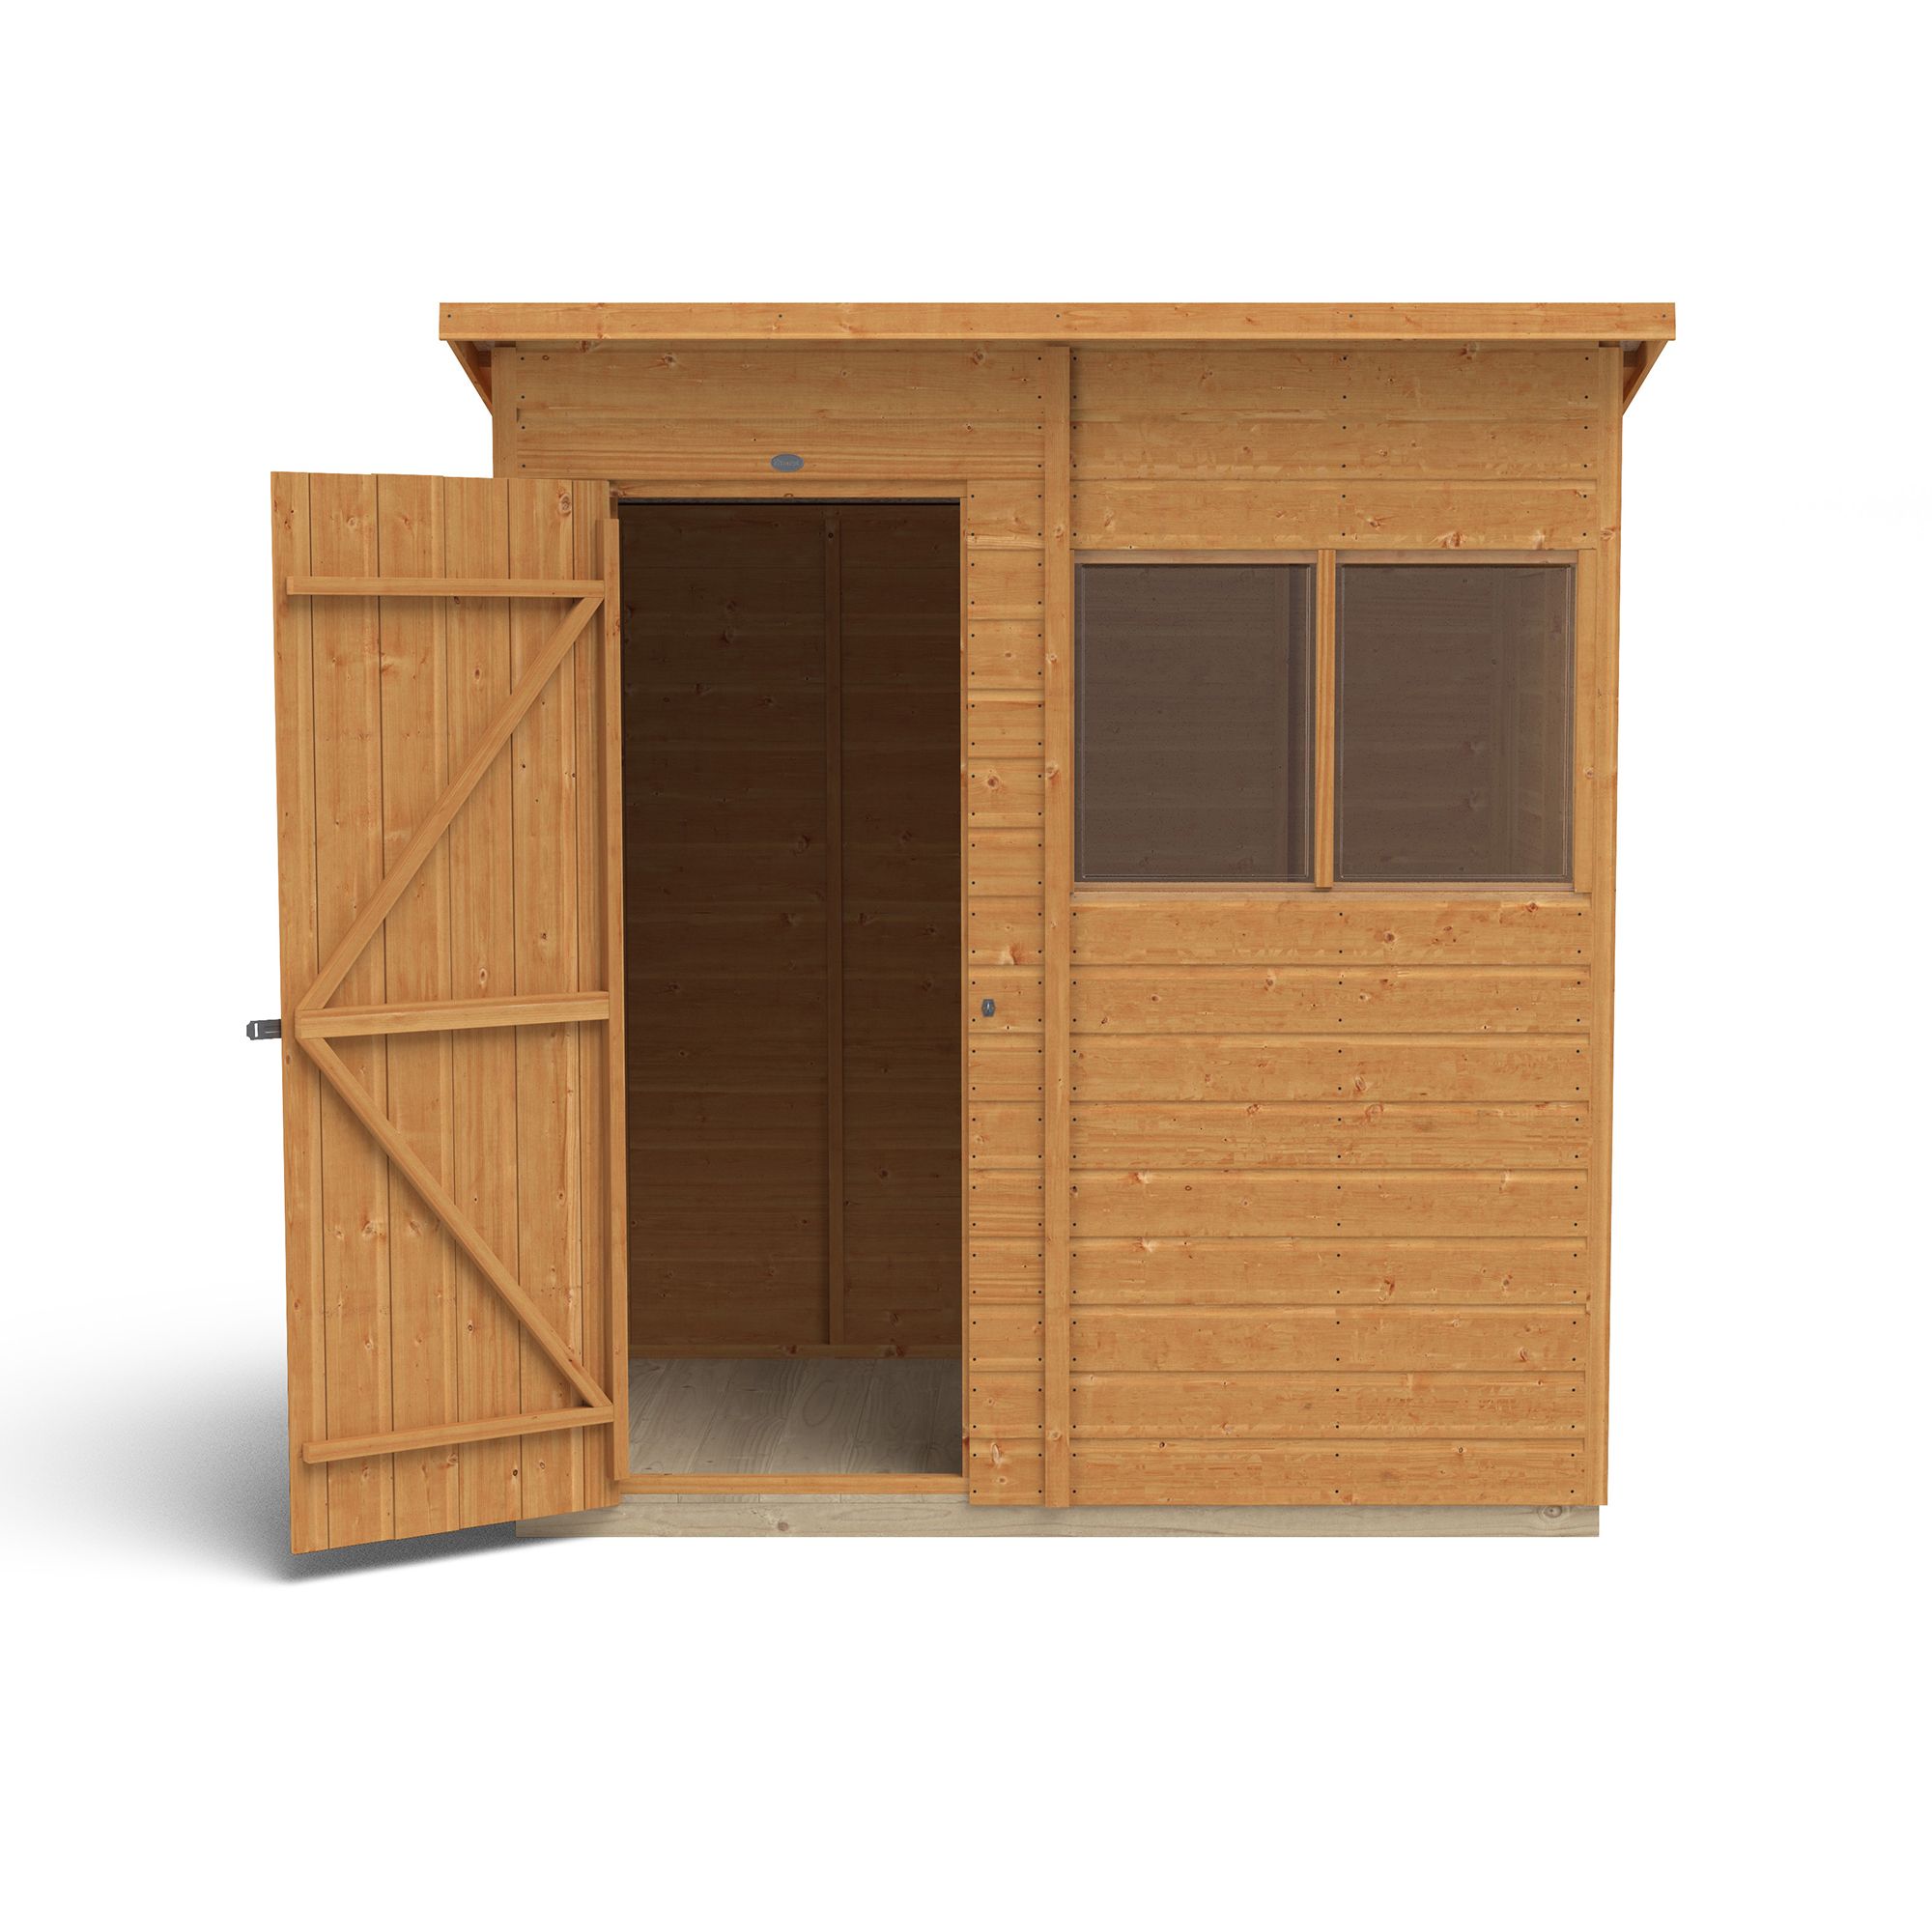 Forest Garden Shiplap 6x4 ft Pent Wooden Shed with floor & 2 windows (Base included) - Assembly service included